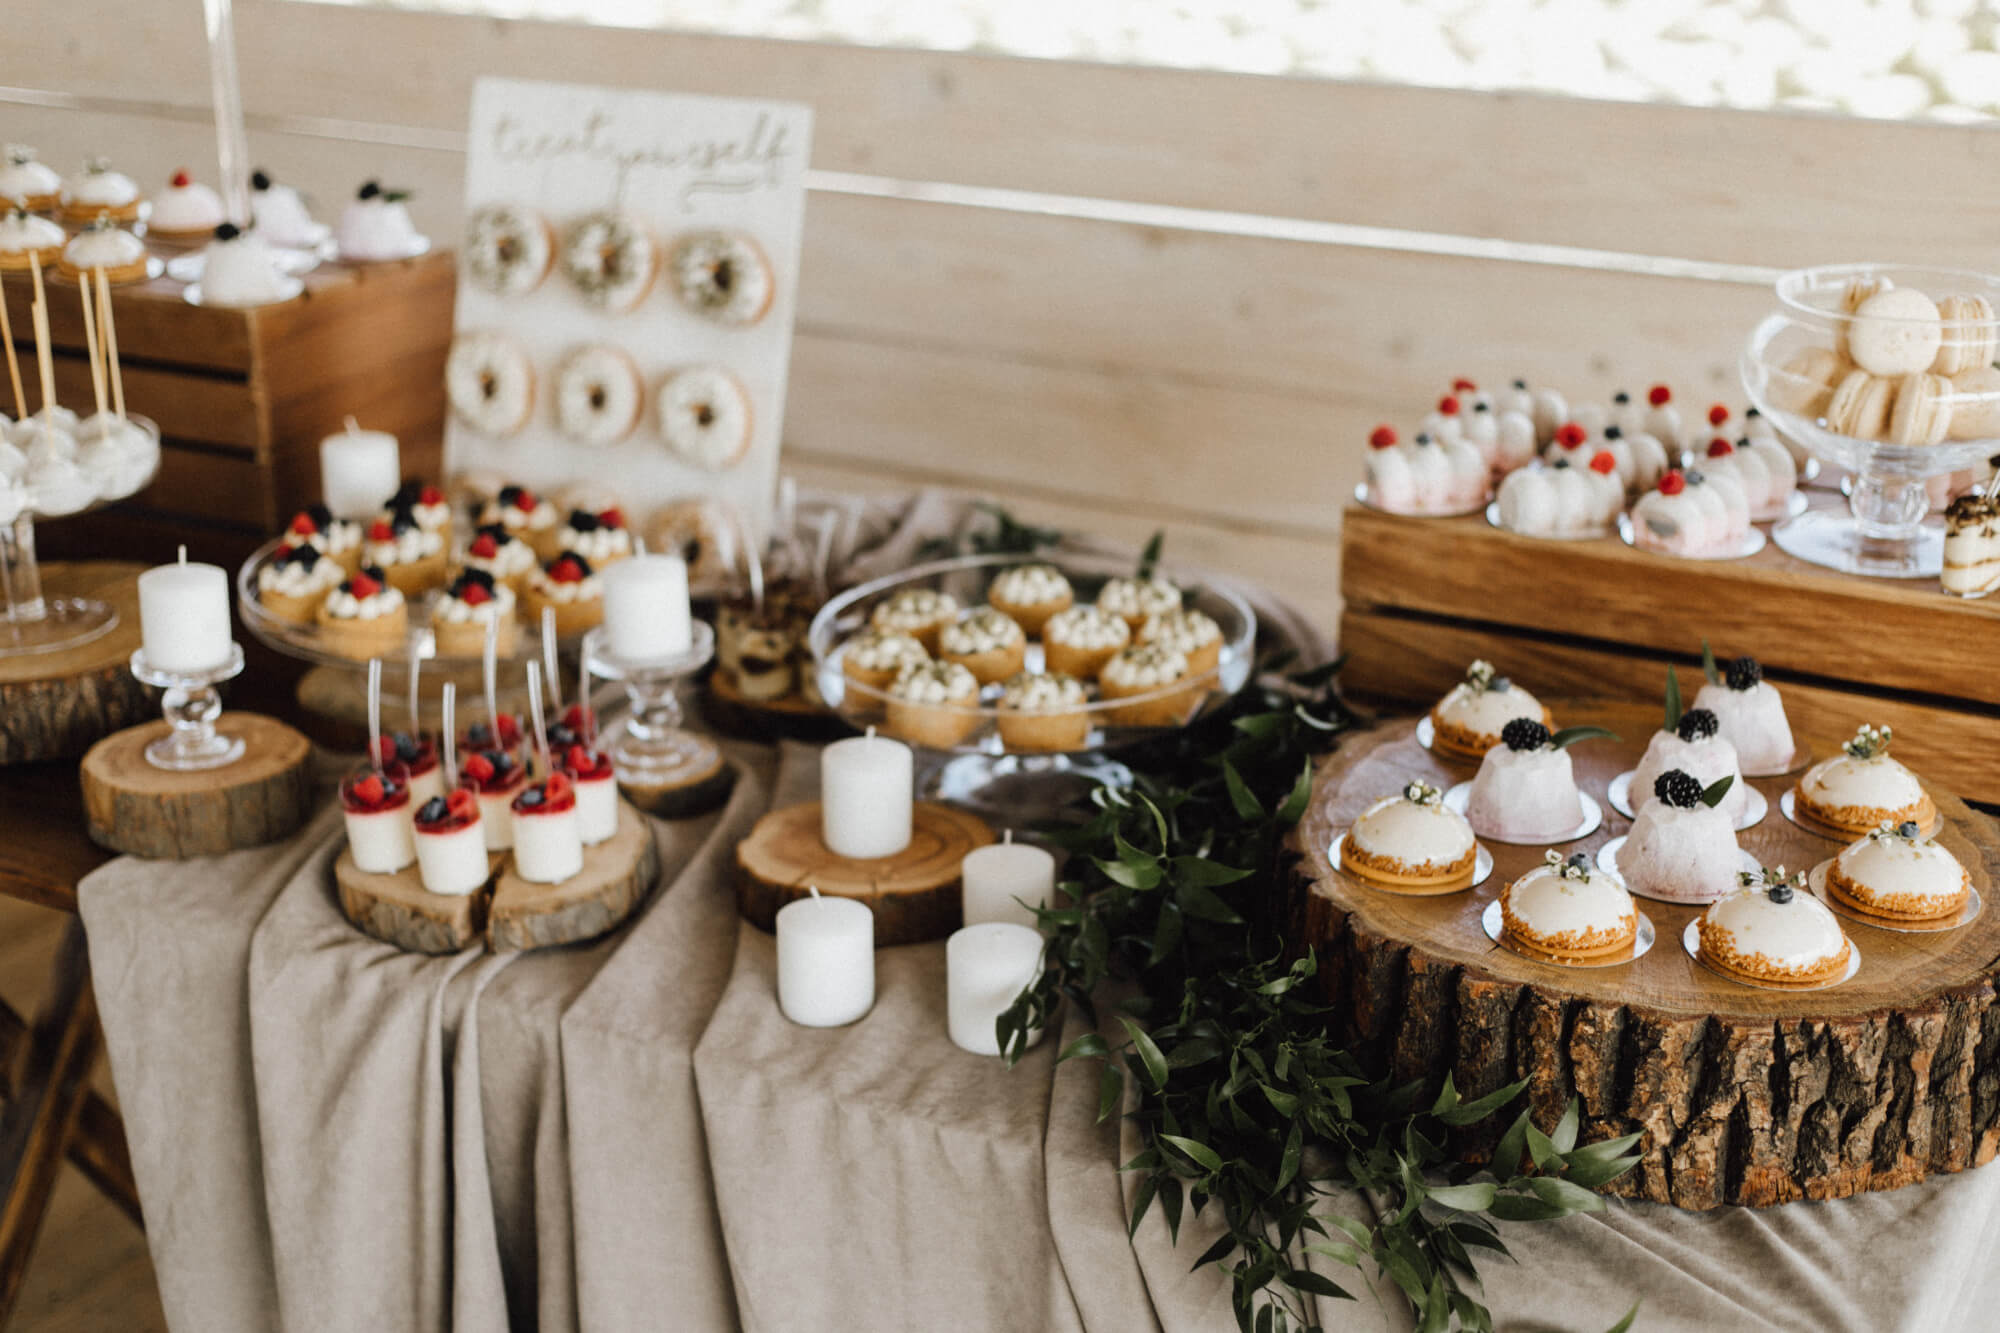 Out-of-the-box-ideas-for-weddings-The-ideal-menu-for-an-unconventional-event-food